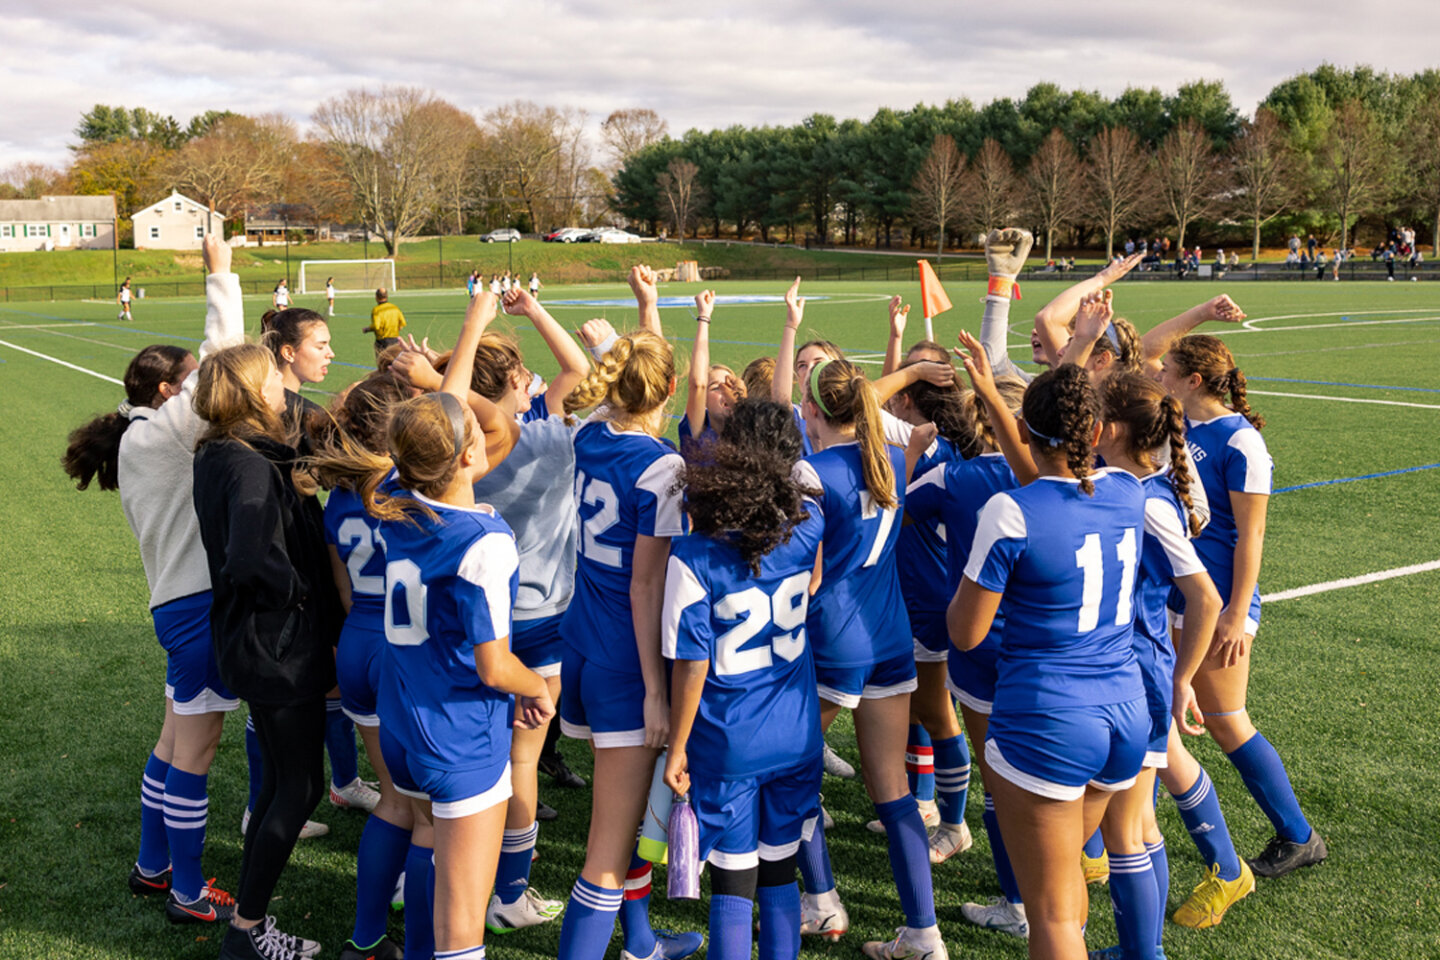 Girls soccer team huddles and cheers on the soccer field